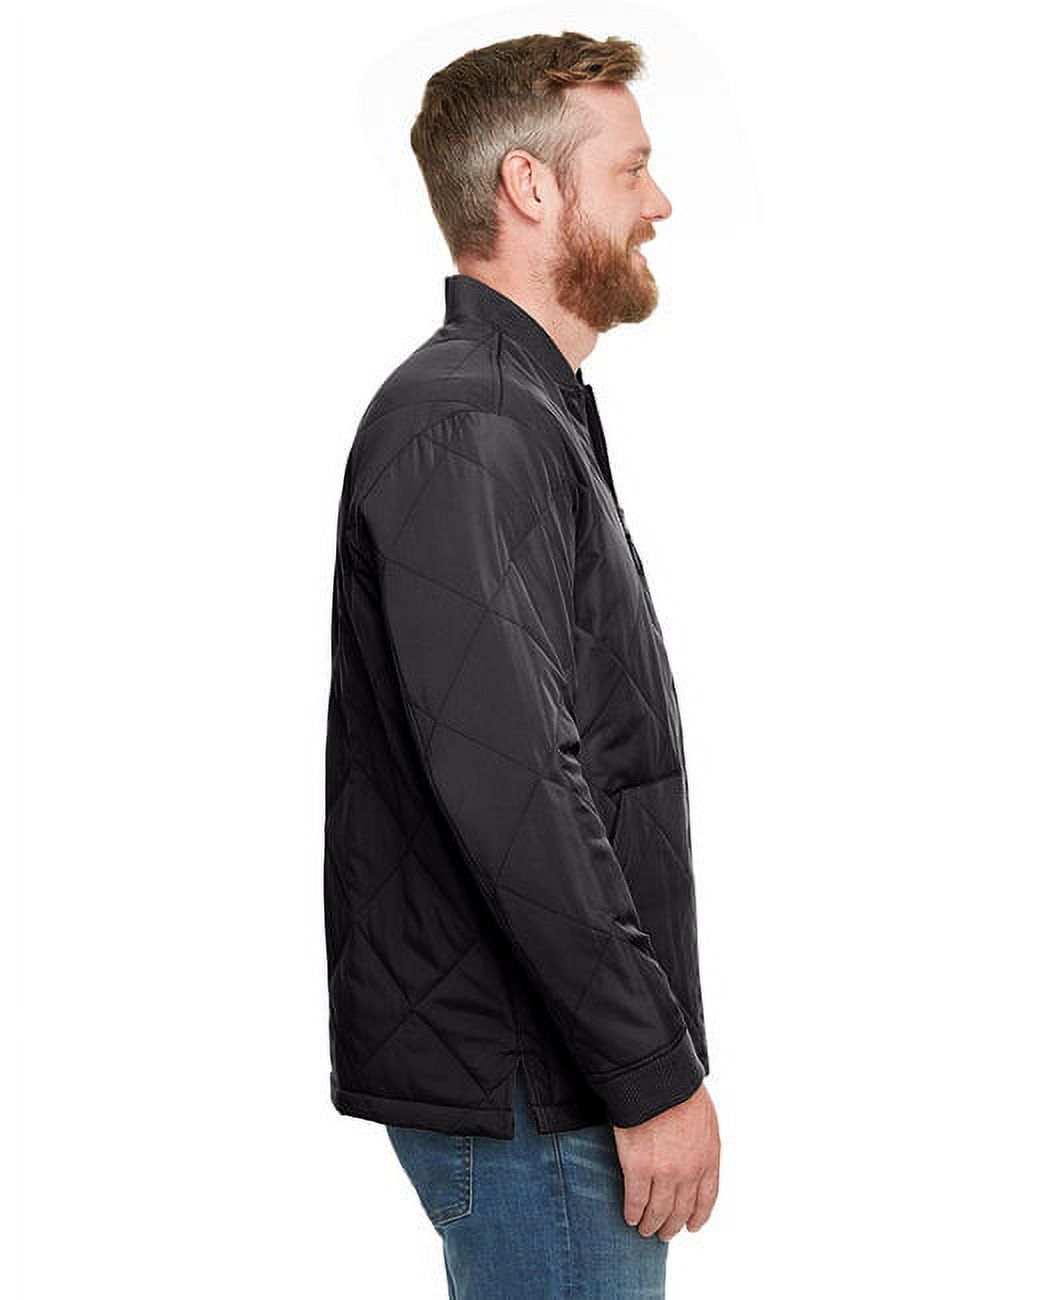 Adult Dockside Insulated Utility Jacket - DARK CHARCOAL - 4XL - image 3 of 3